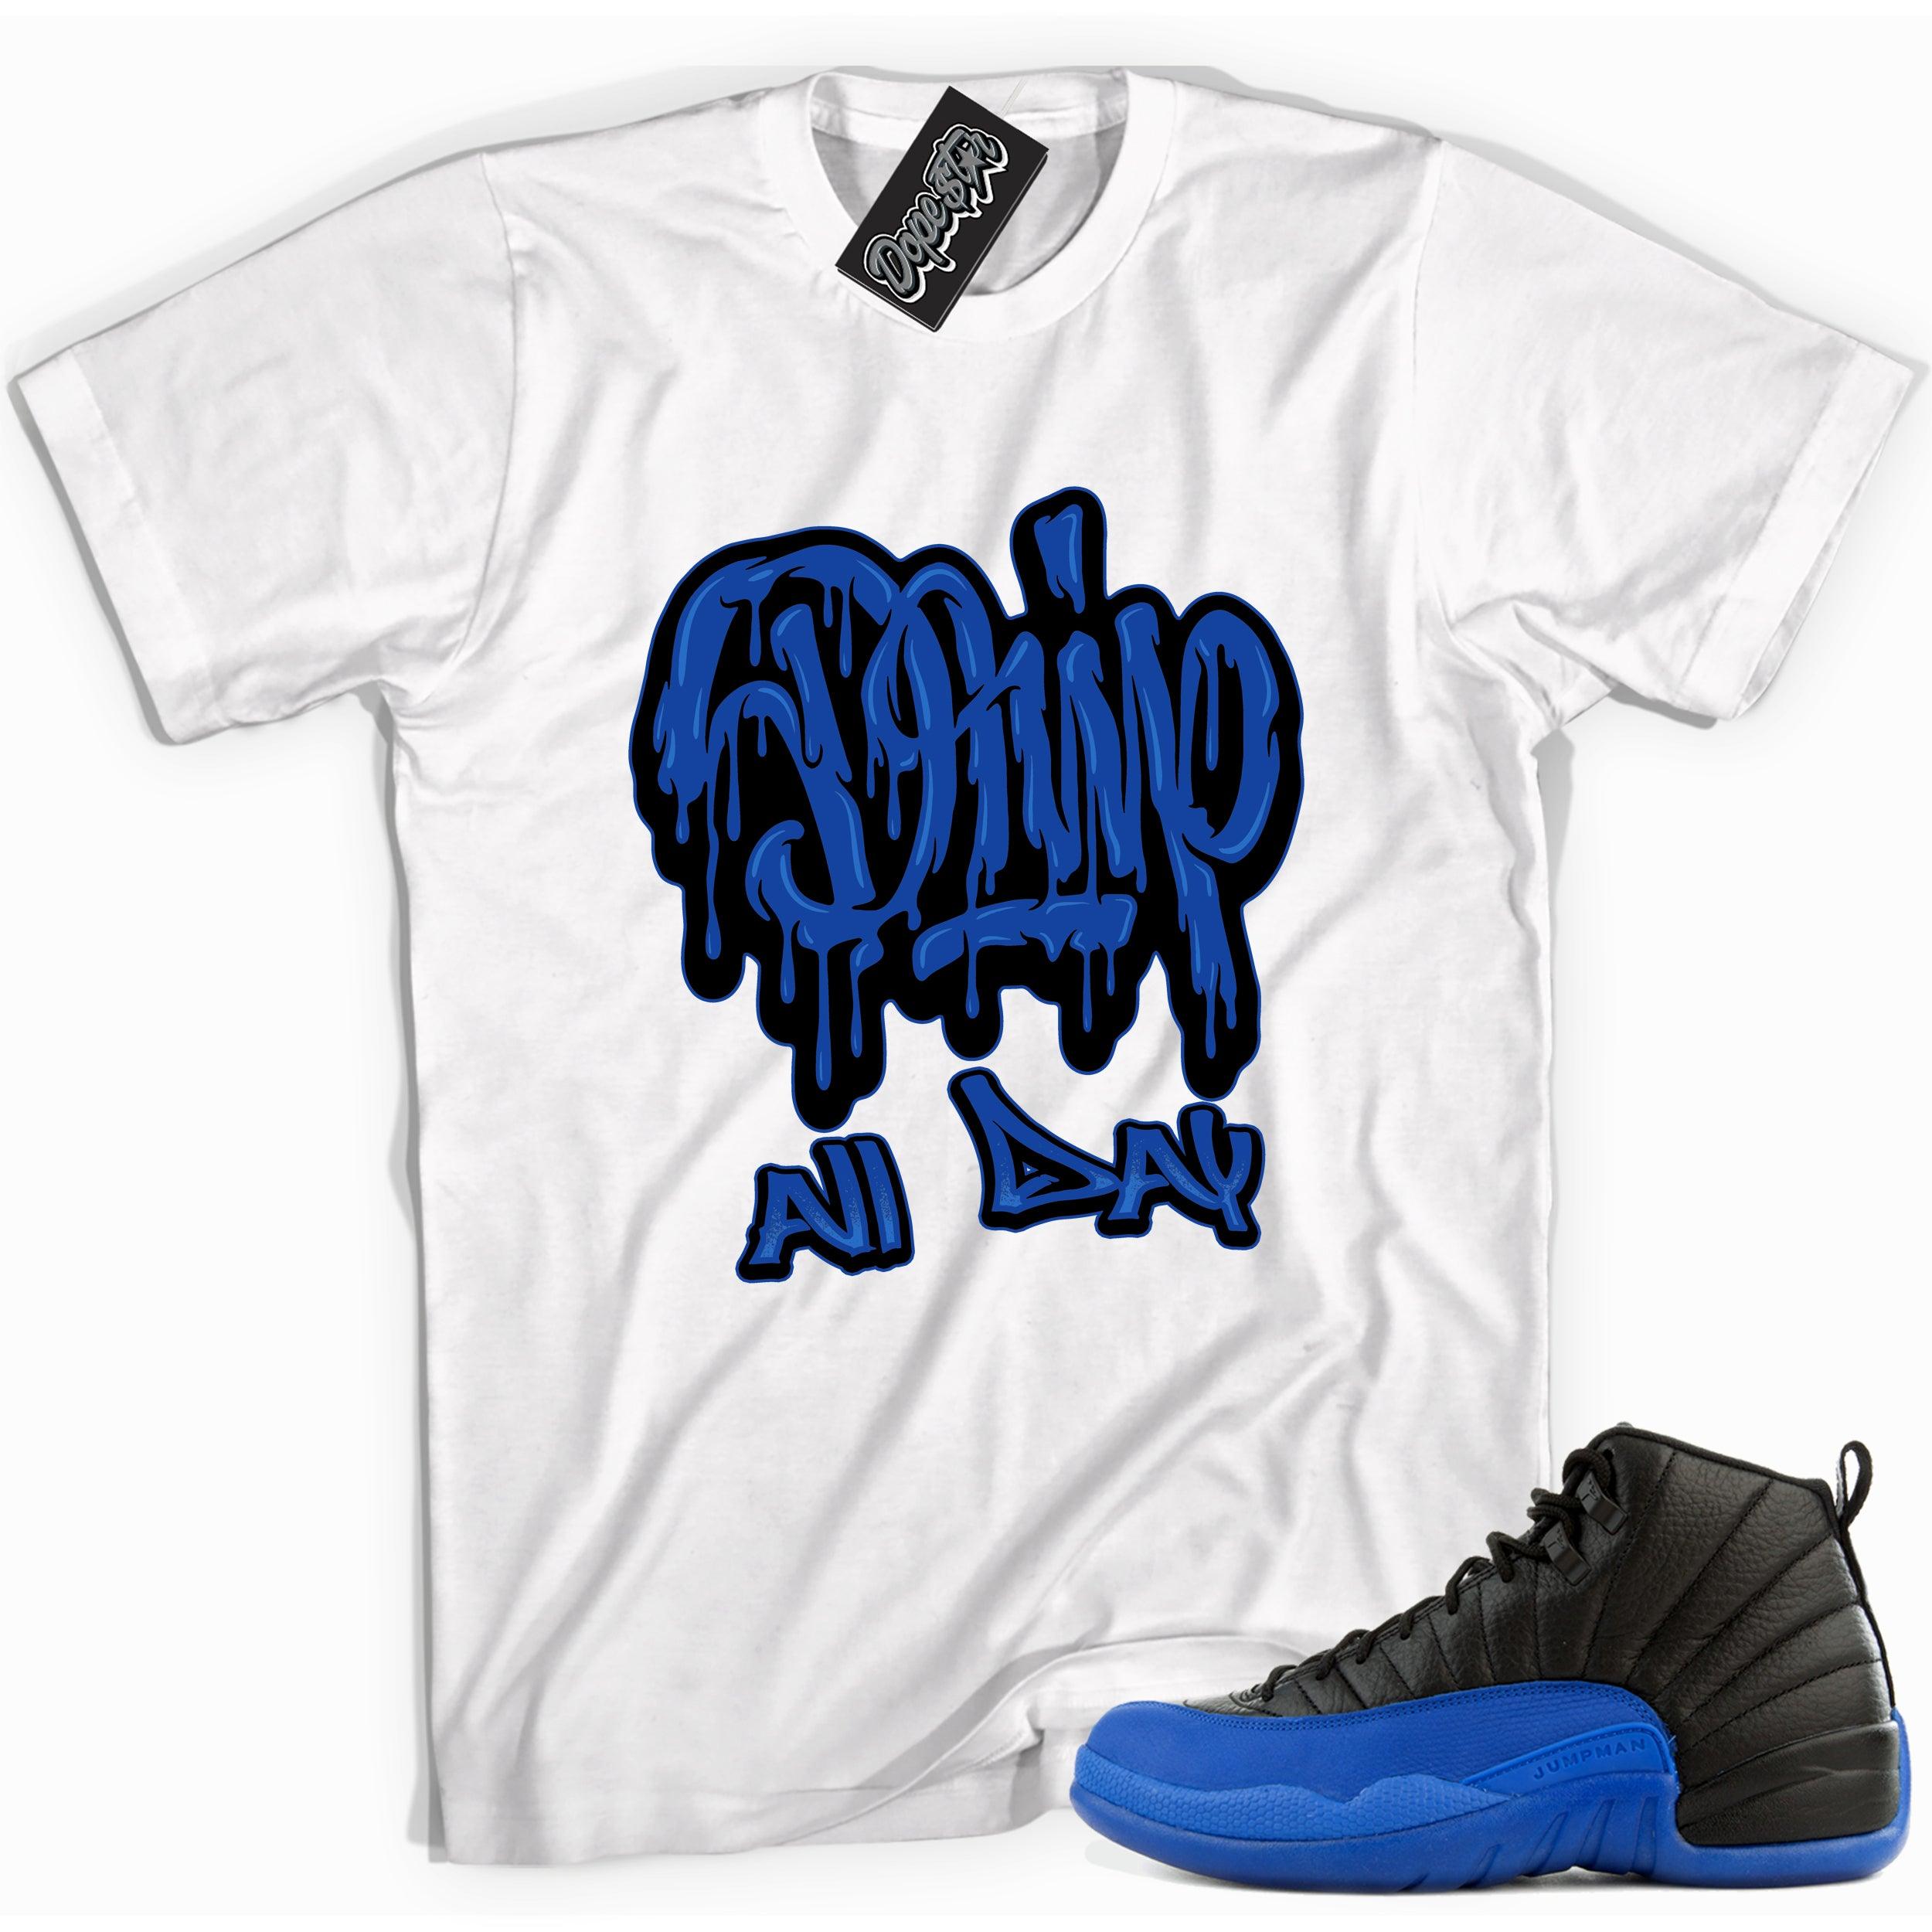 Cool white graphic tee with 'drip all day' print, that perfectly matches  Air Jordan 12 Retro Black Game Royal sneakers.